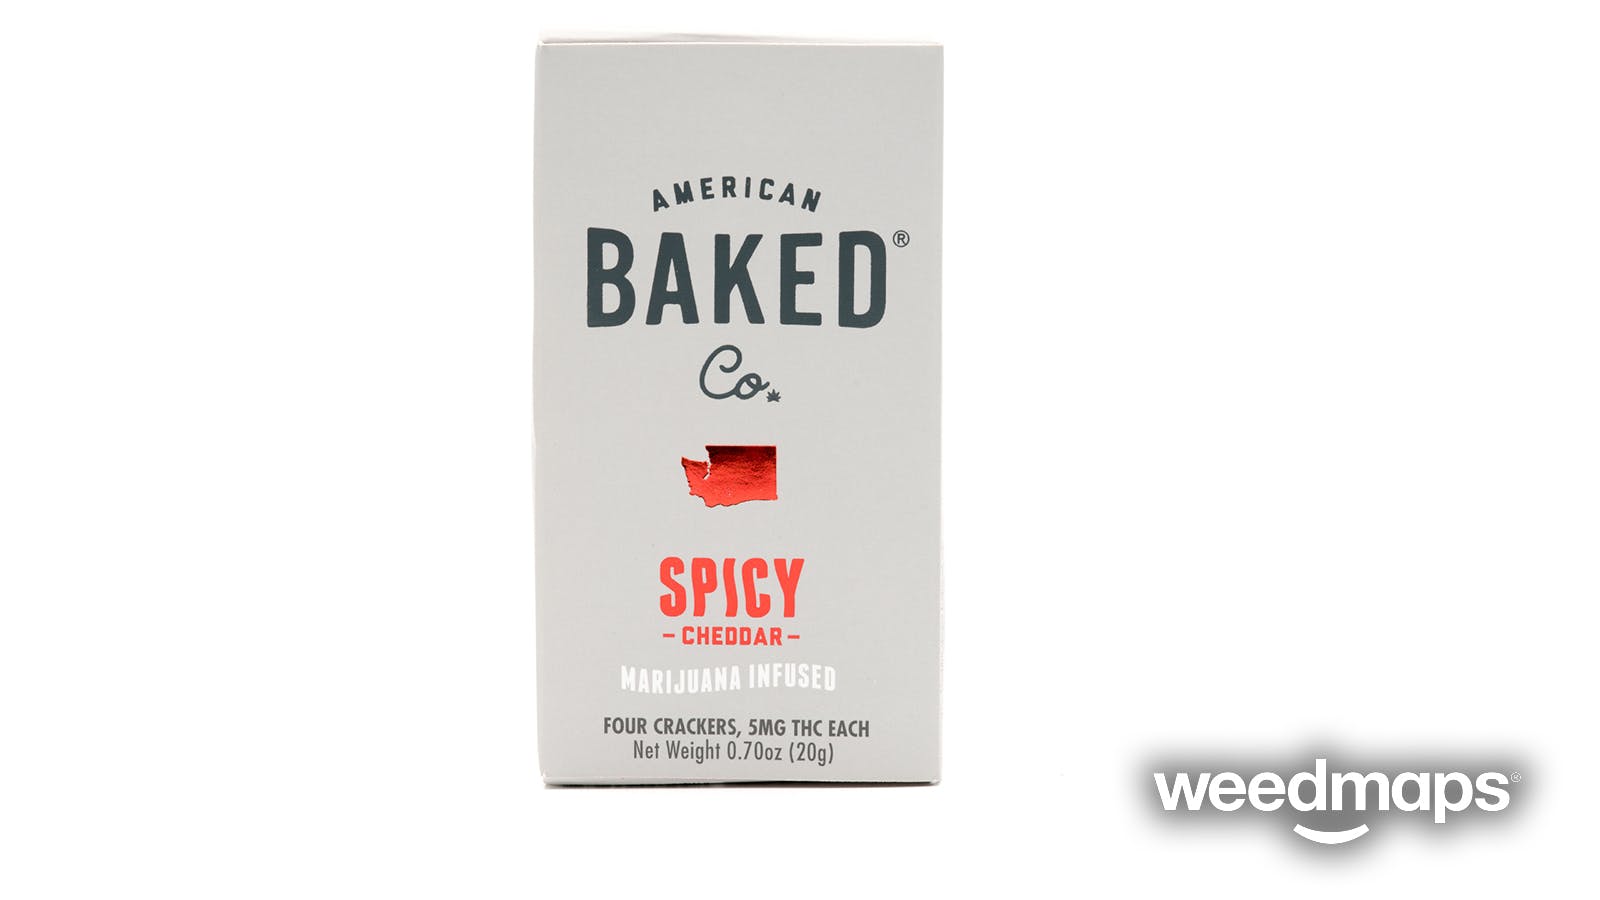 edible-american-baked-spicy-cheddar-crackers-20-can-1348